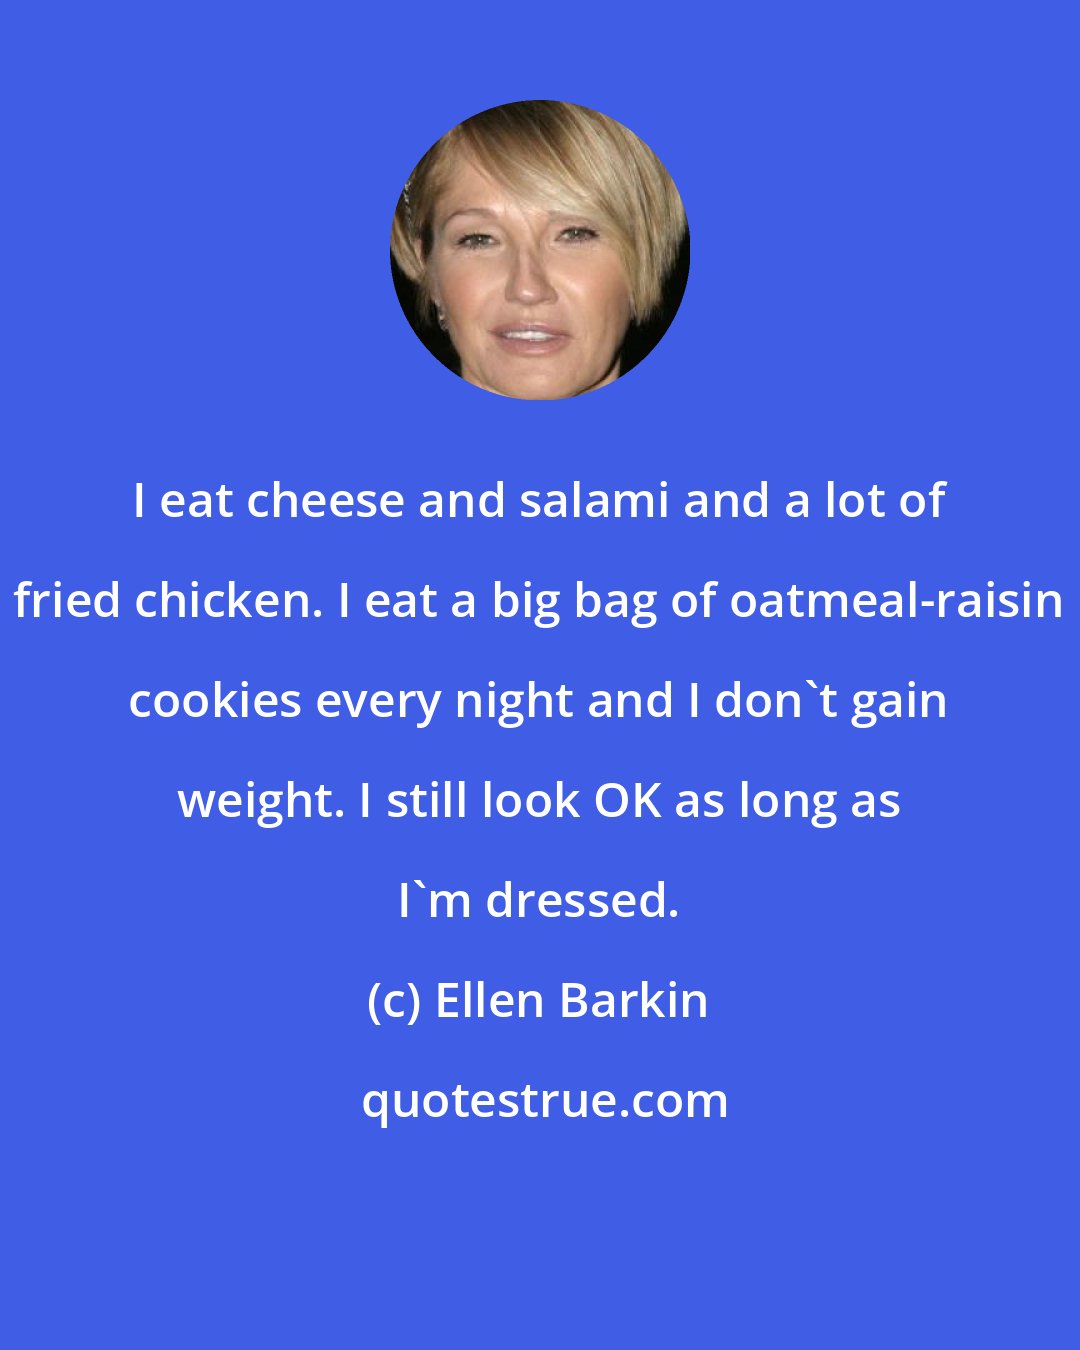 Ellen Barkin: I eat cheese and salami and a lot of fried chicken. I eat a big bag of oatmeal-raisin cookies every night and I don't gain weight. I still look OK as long as I'm dressed.